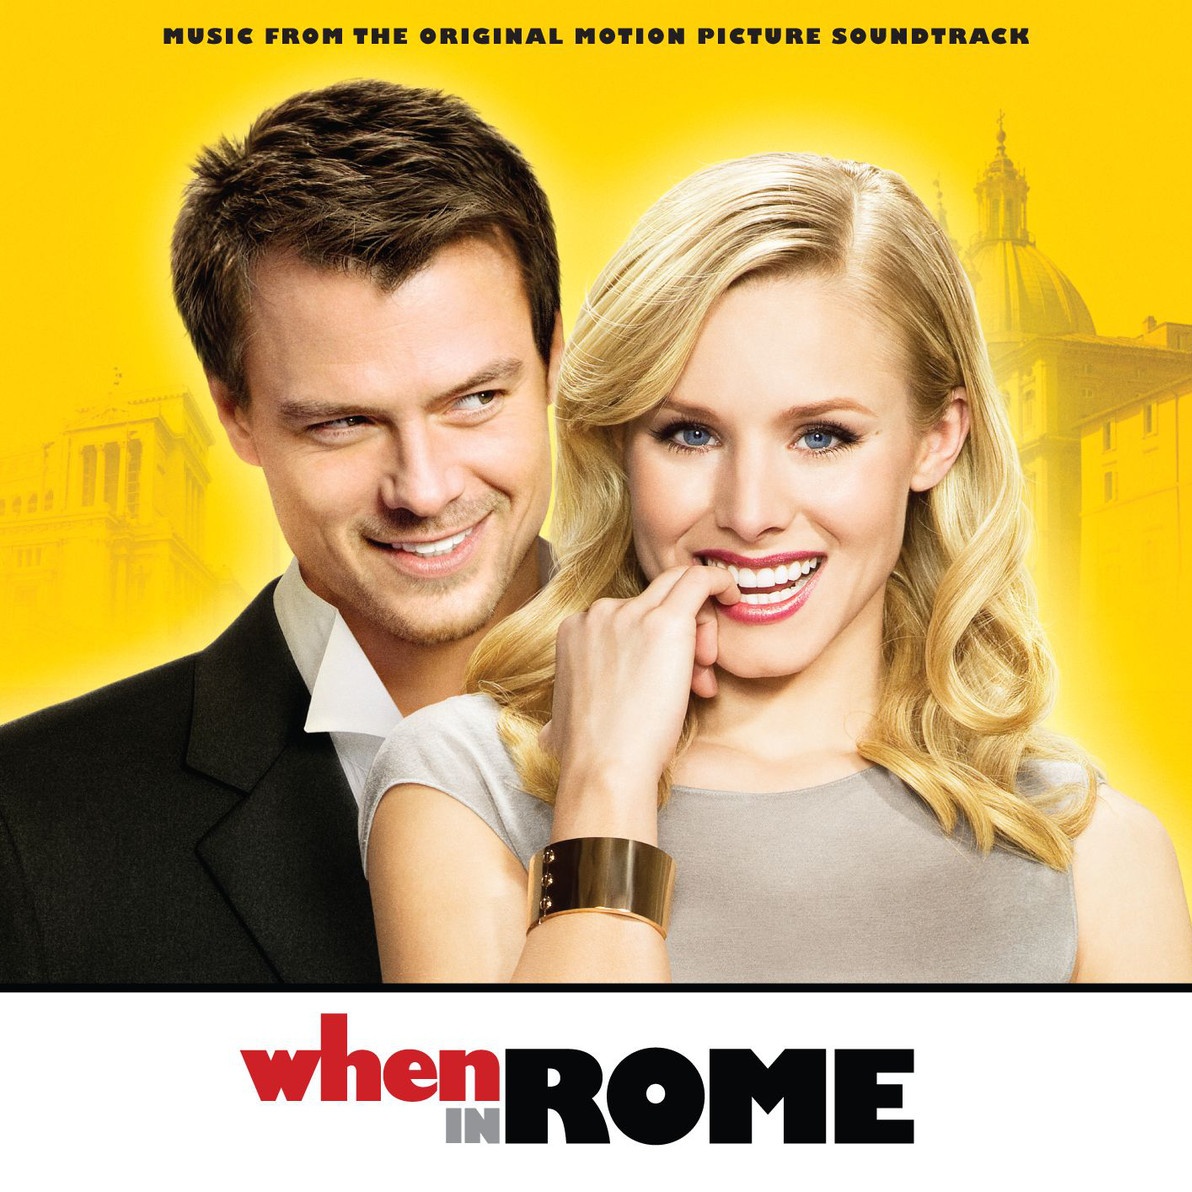 When in Rome (Music from the Original Motion Picture Soundtrack)